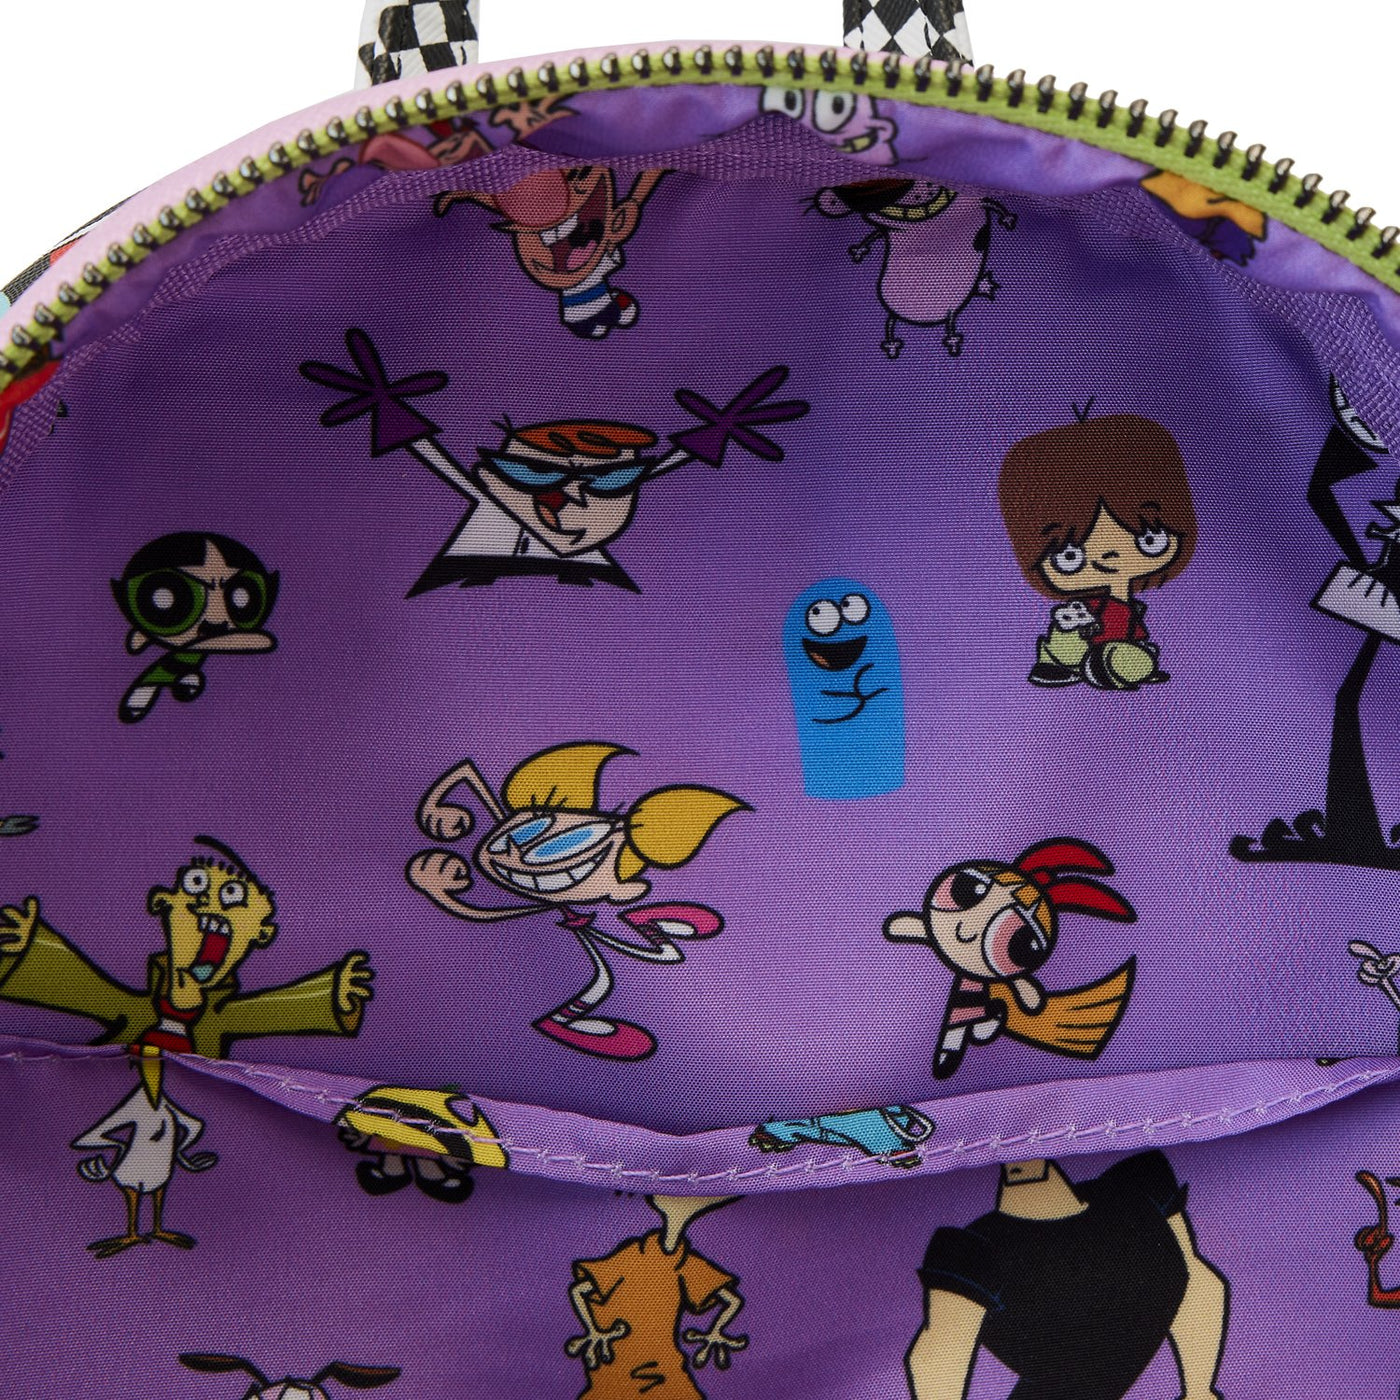 671803465060 - Loungefly Cartoon Network Retro Collage Mini Backpack - Interior Lining